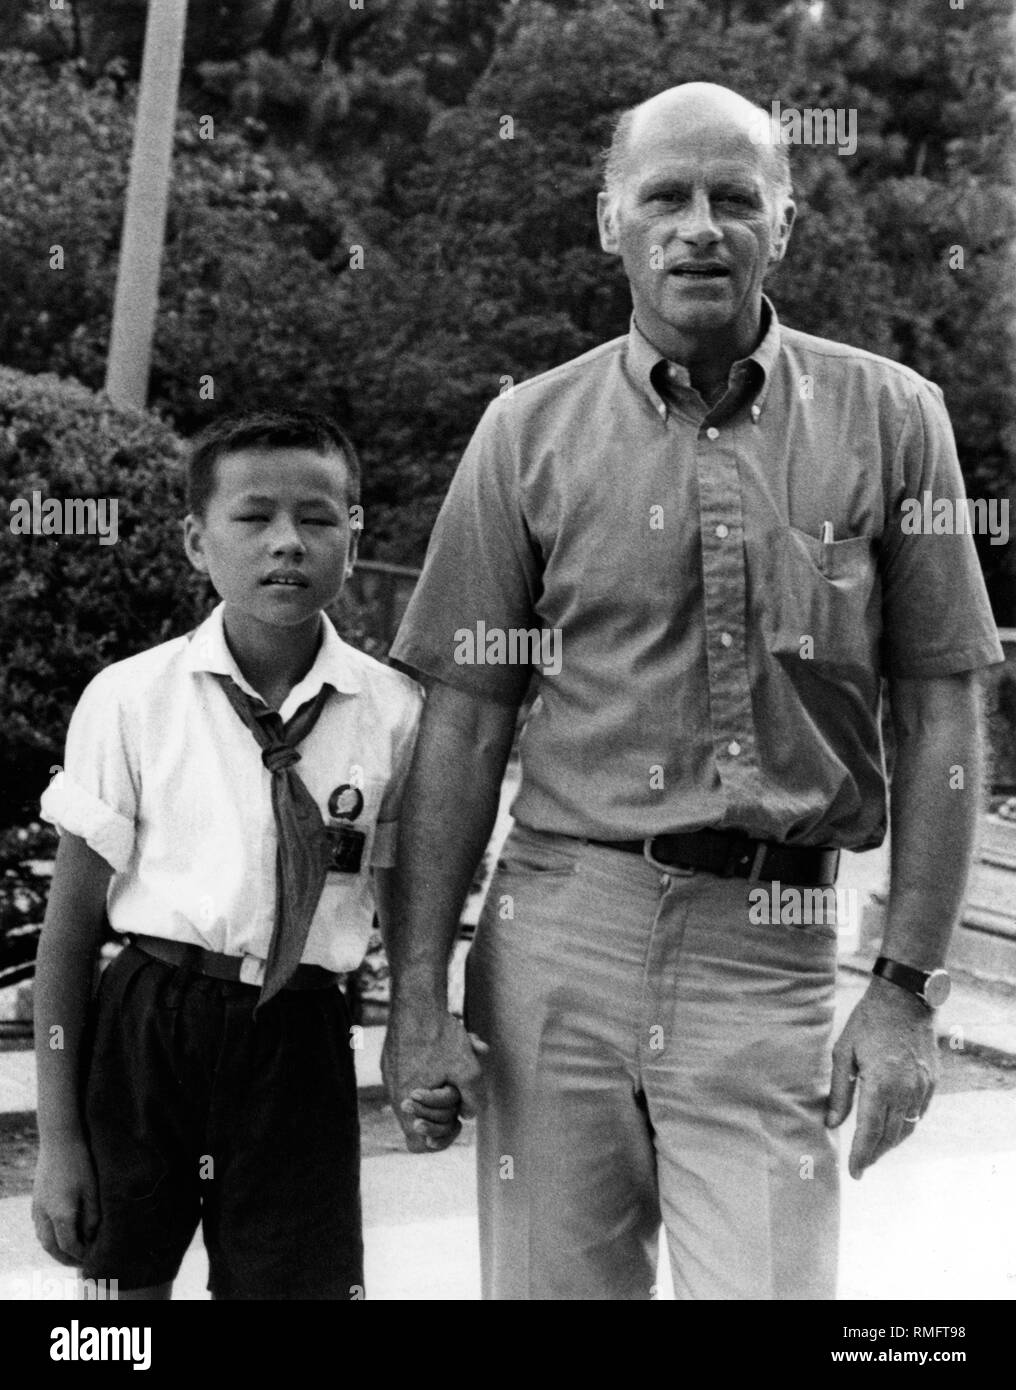 The chief correspondent of the Sueddeutsche Zeitung, Hans Ulrich Kempski, is led by a 'little red soldier' through the facilities of the Youth Palace in Shanghai. He holds the boy by the hand. Stock Photo